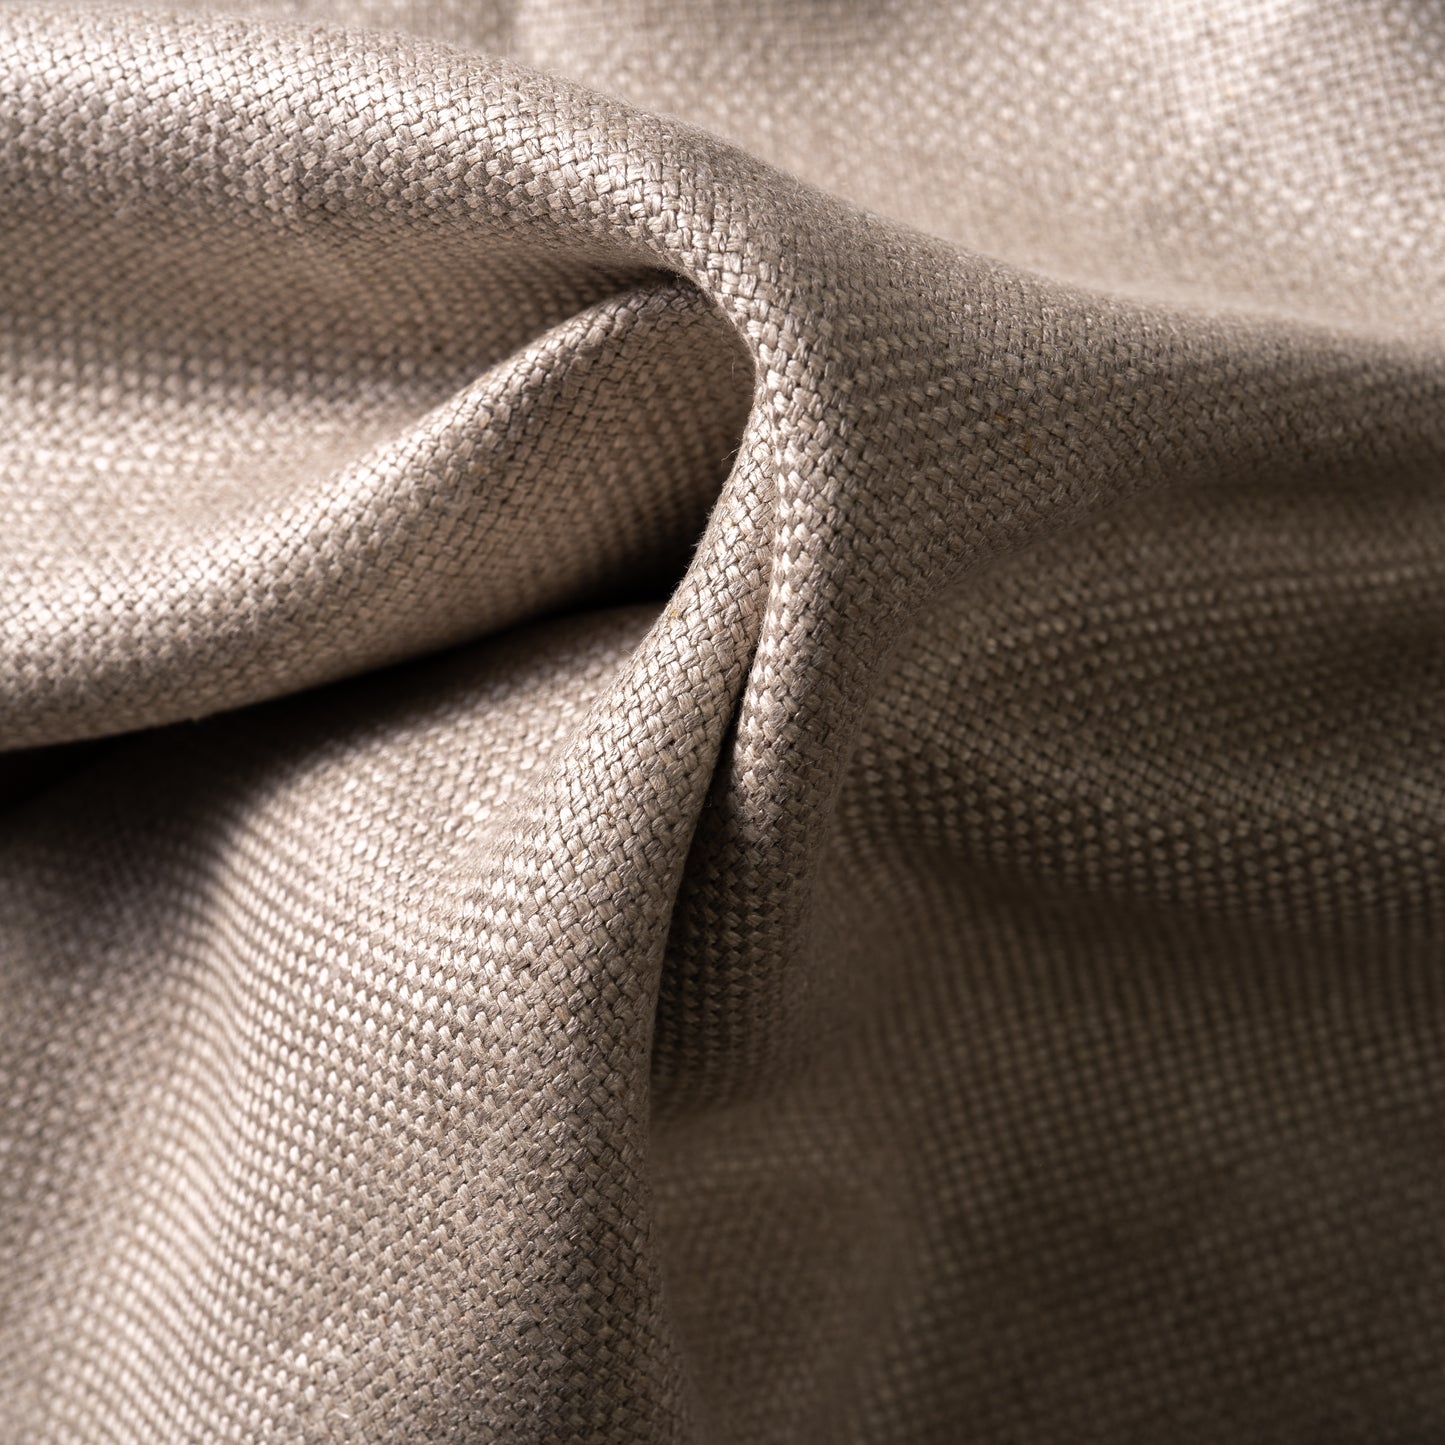 14.5 oz/sq yard 100% Upholstery Weight Linen in Natural